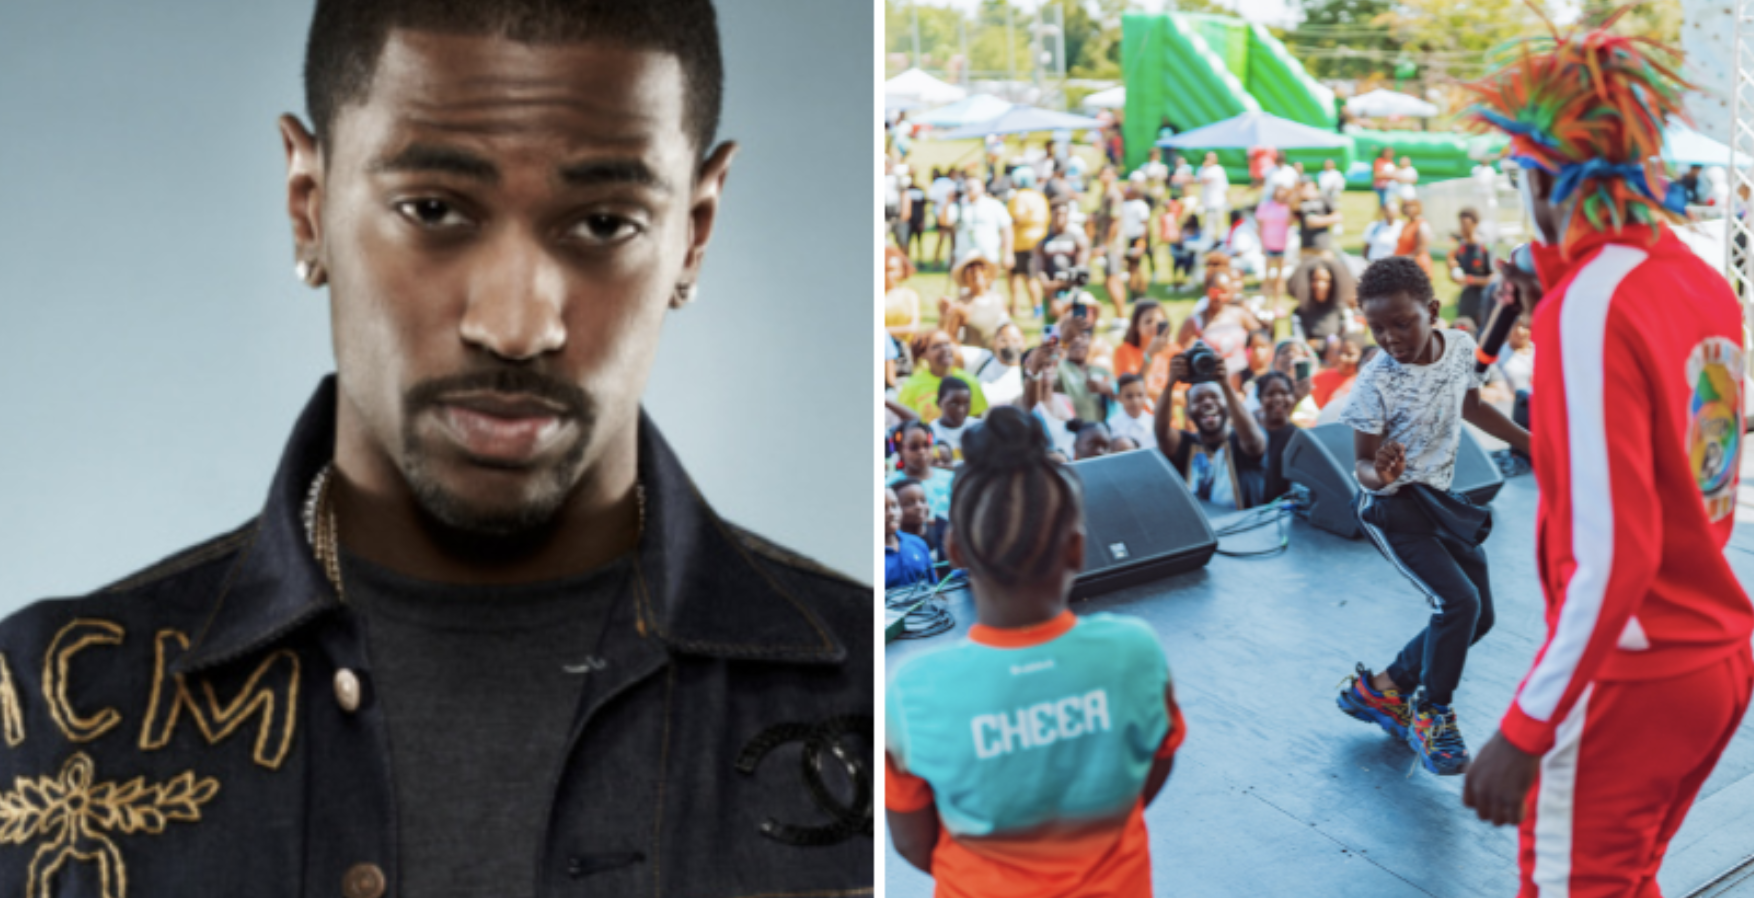 2022 DON Weekend Block Party Features Big Sean in Fourth Annual Event